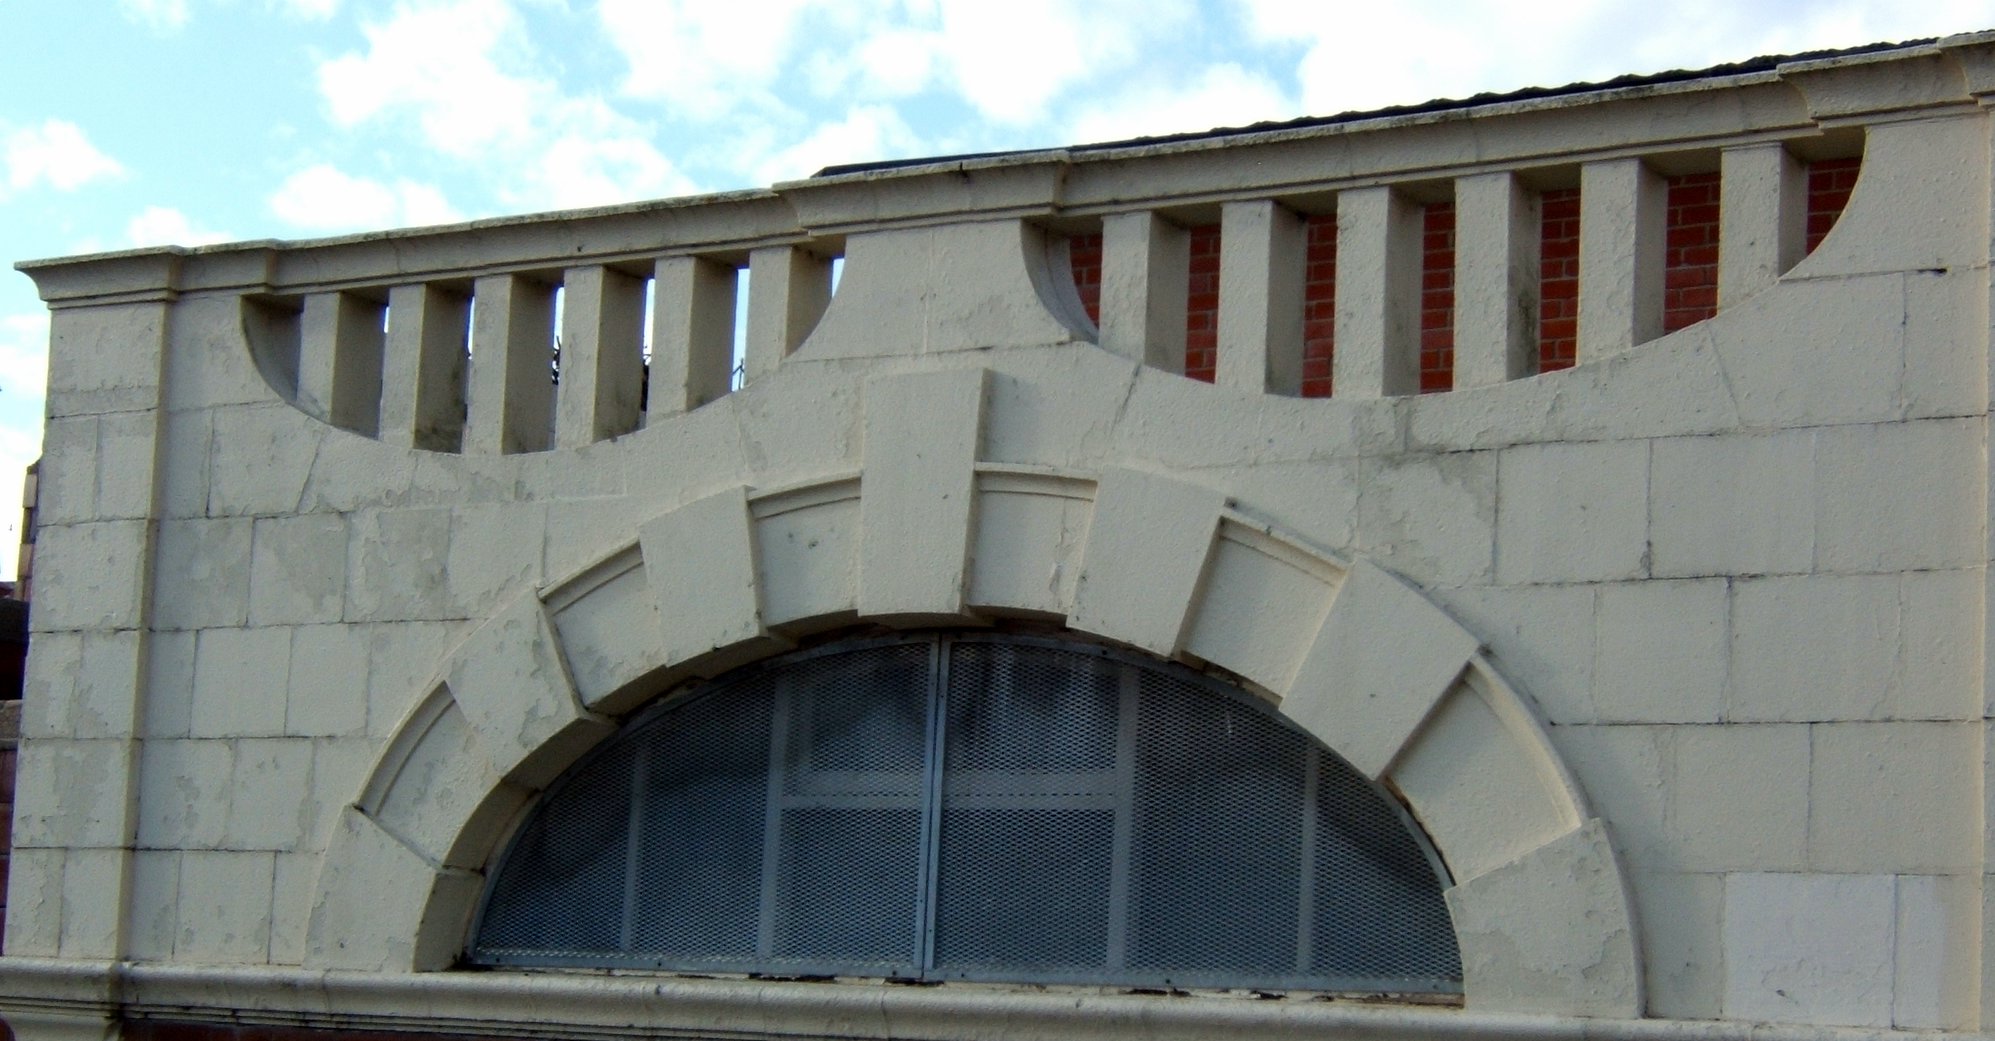 an arched window in an old white brick building